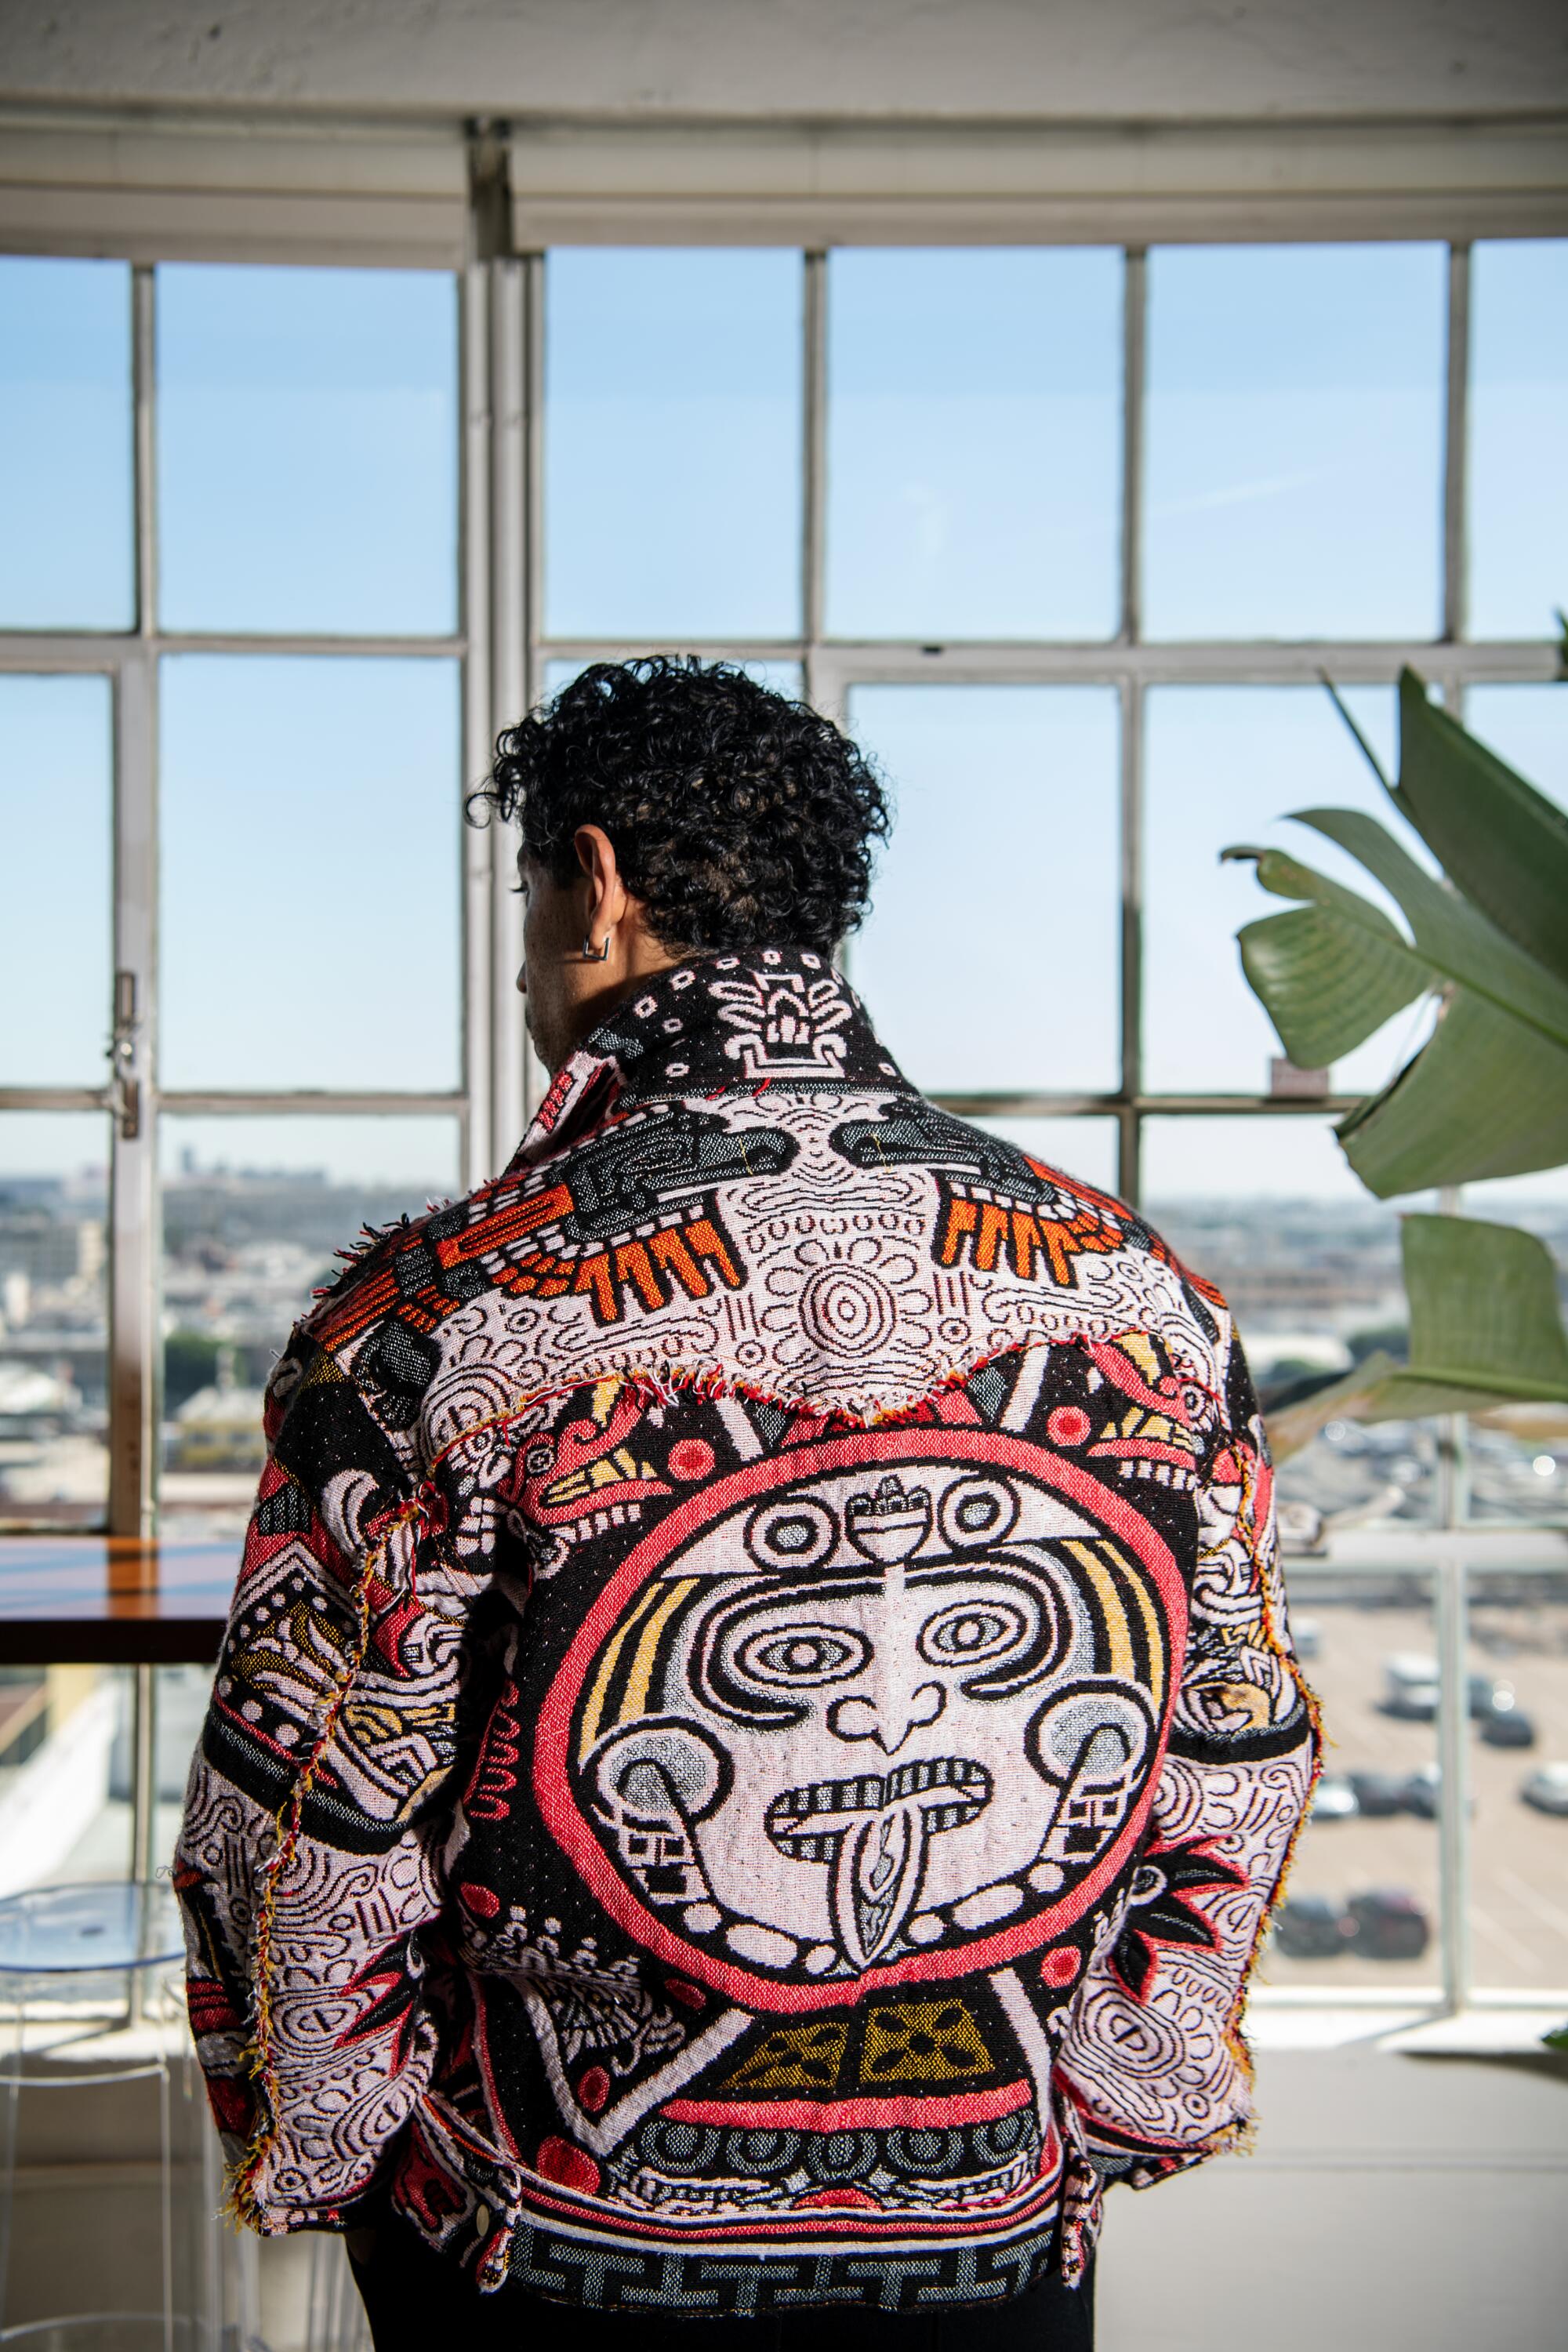 A man faces his back away from us so we can see the colorful geometric prints of his jacket.